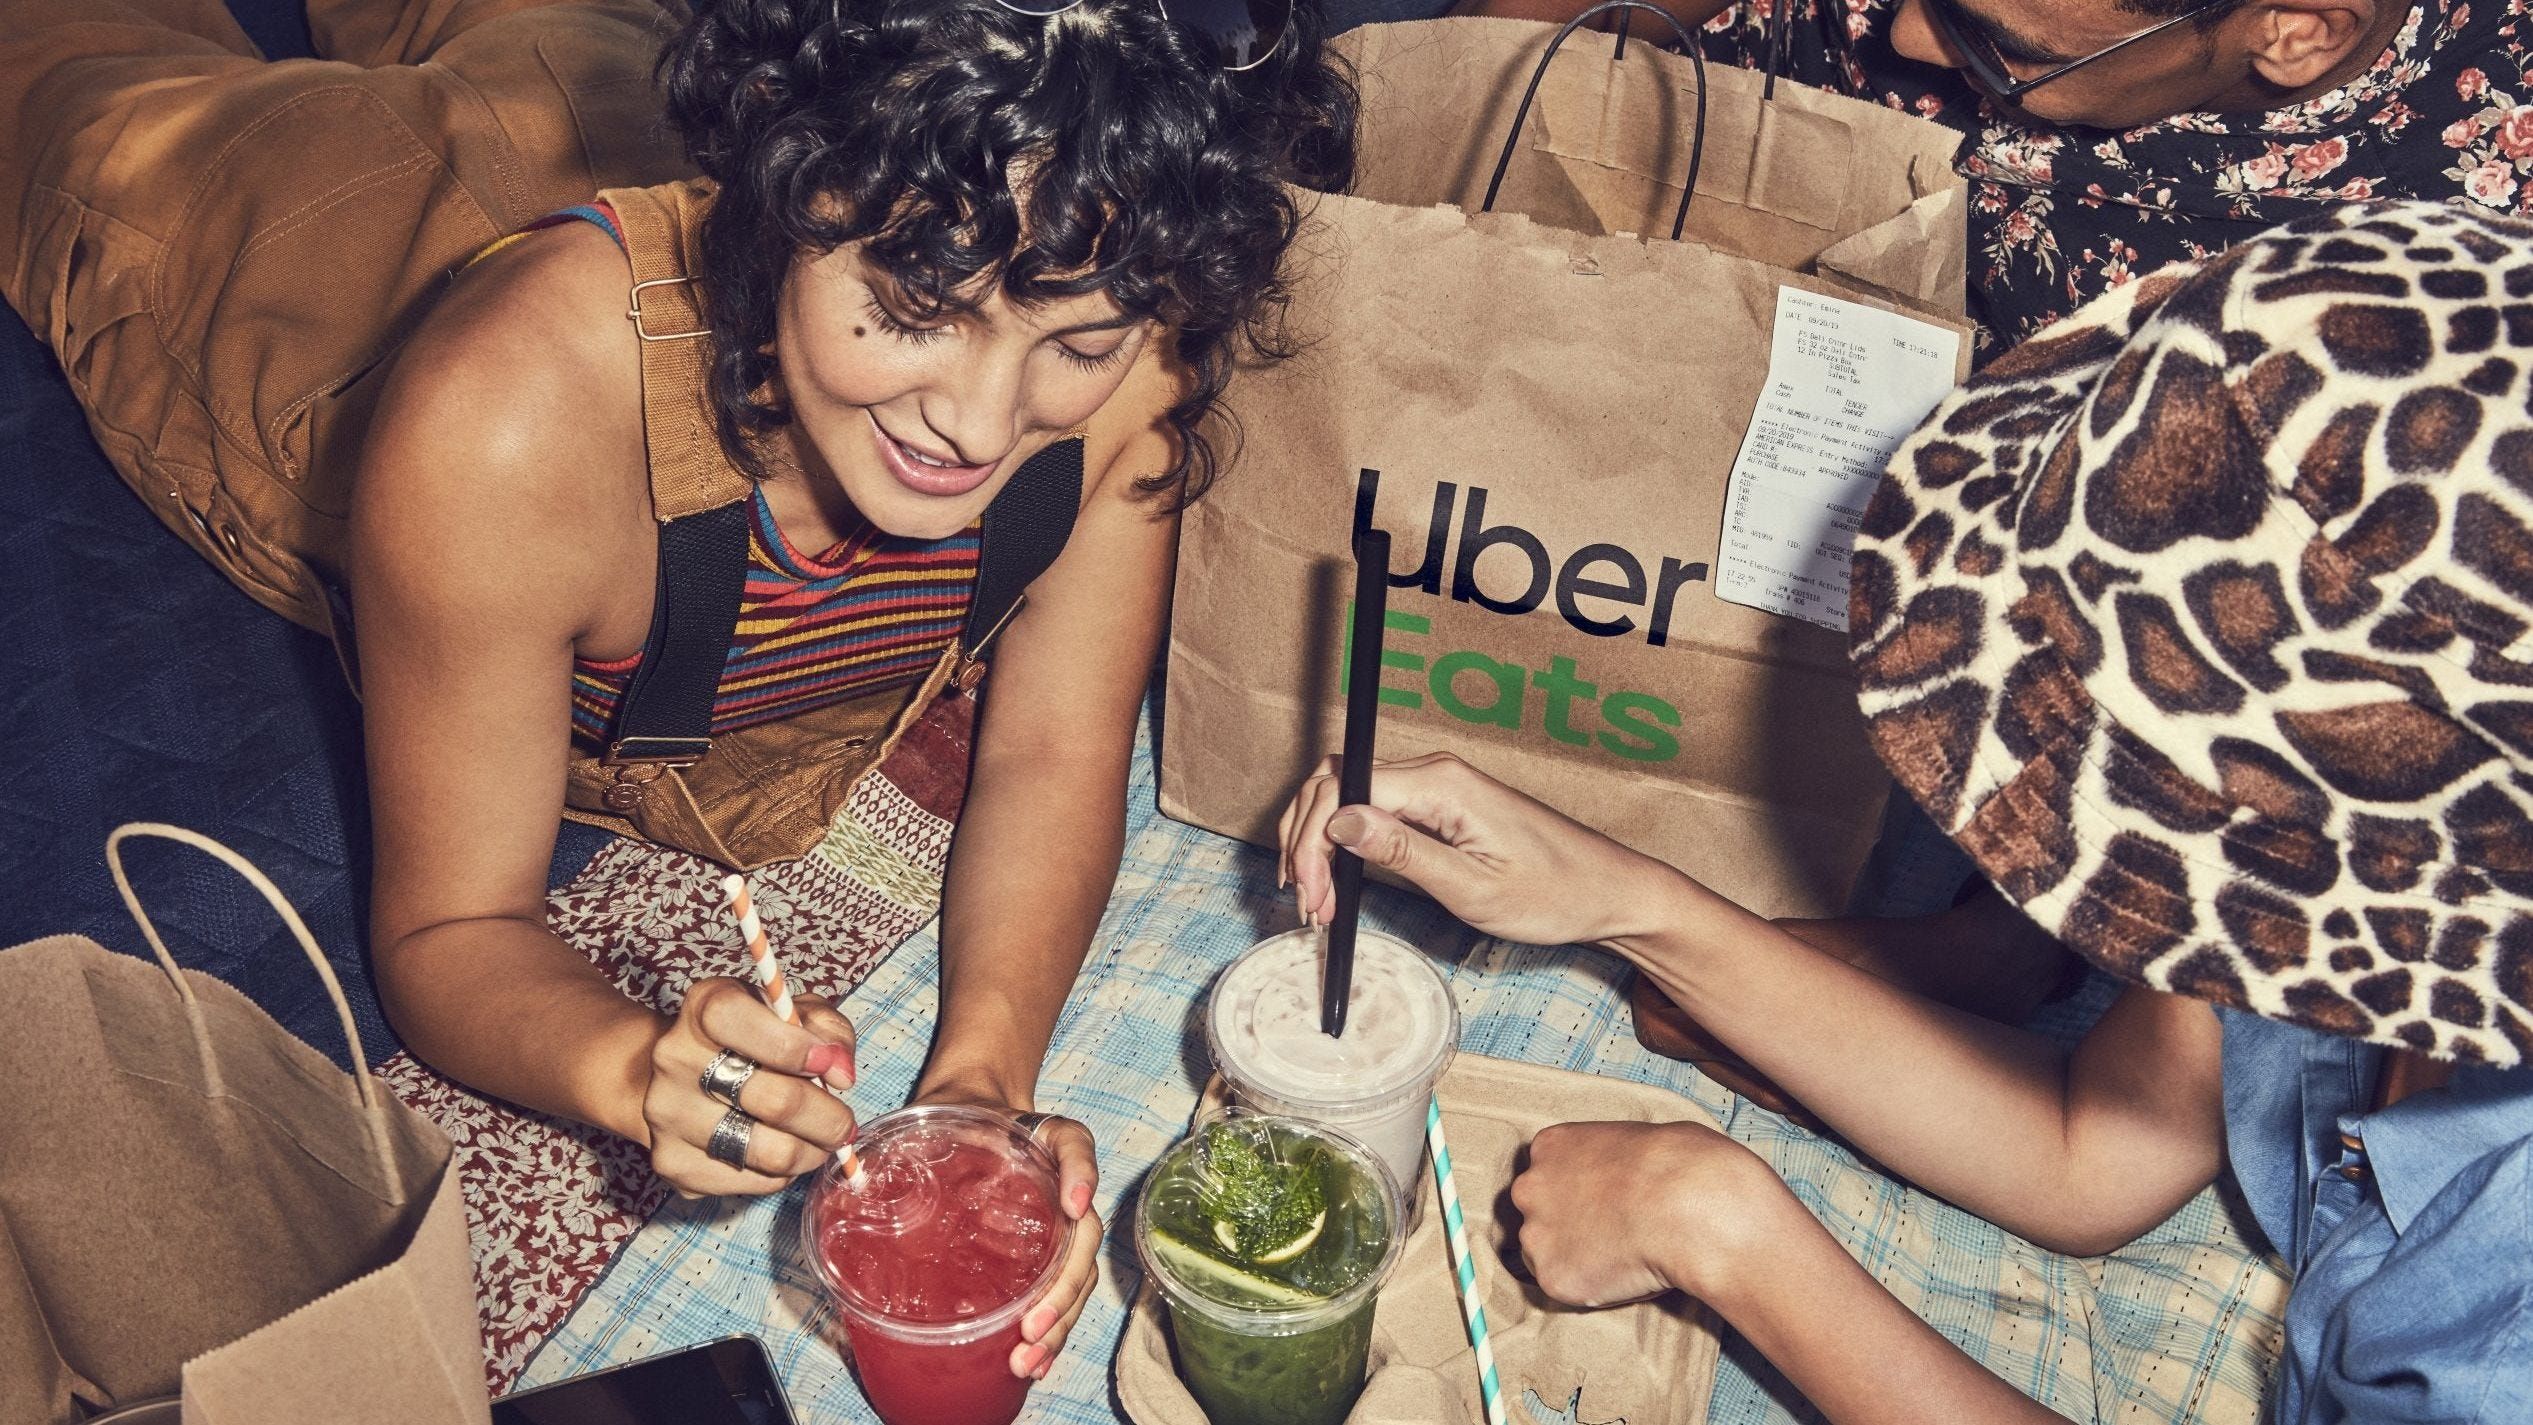 Two people pushing straws into their drinks ordered from Uber Eats 